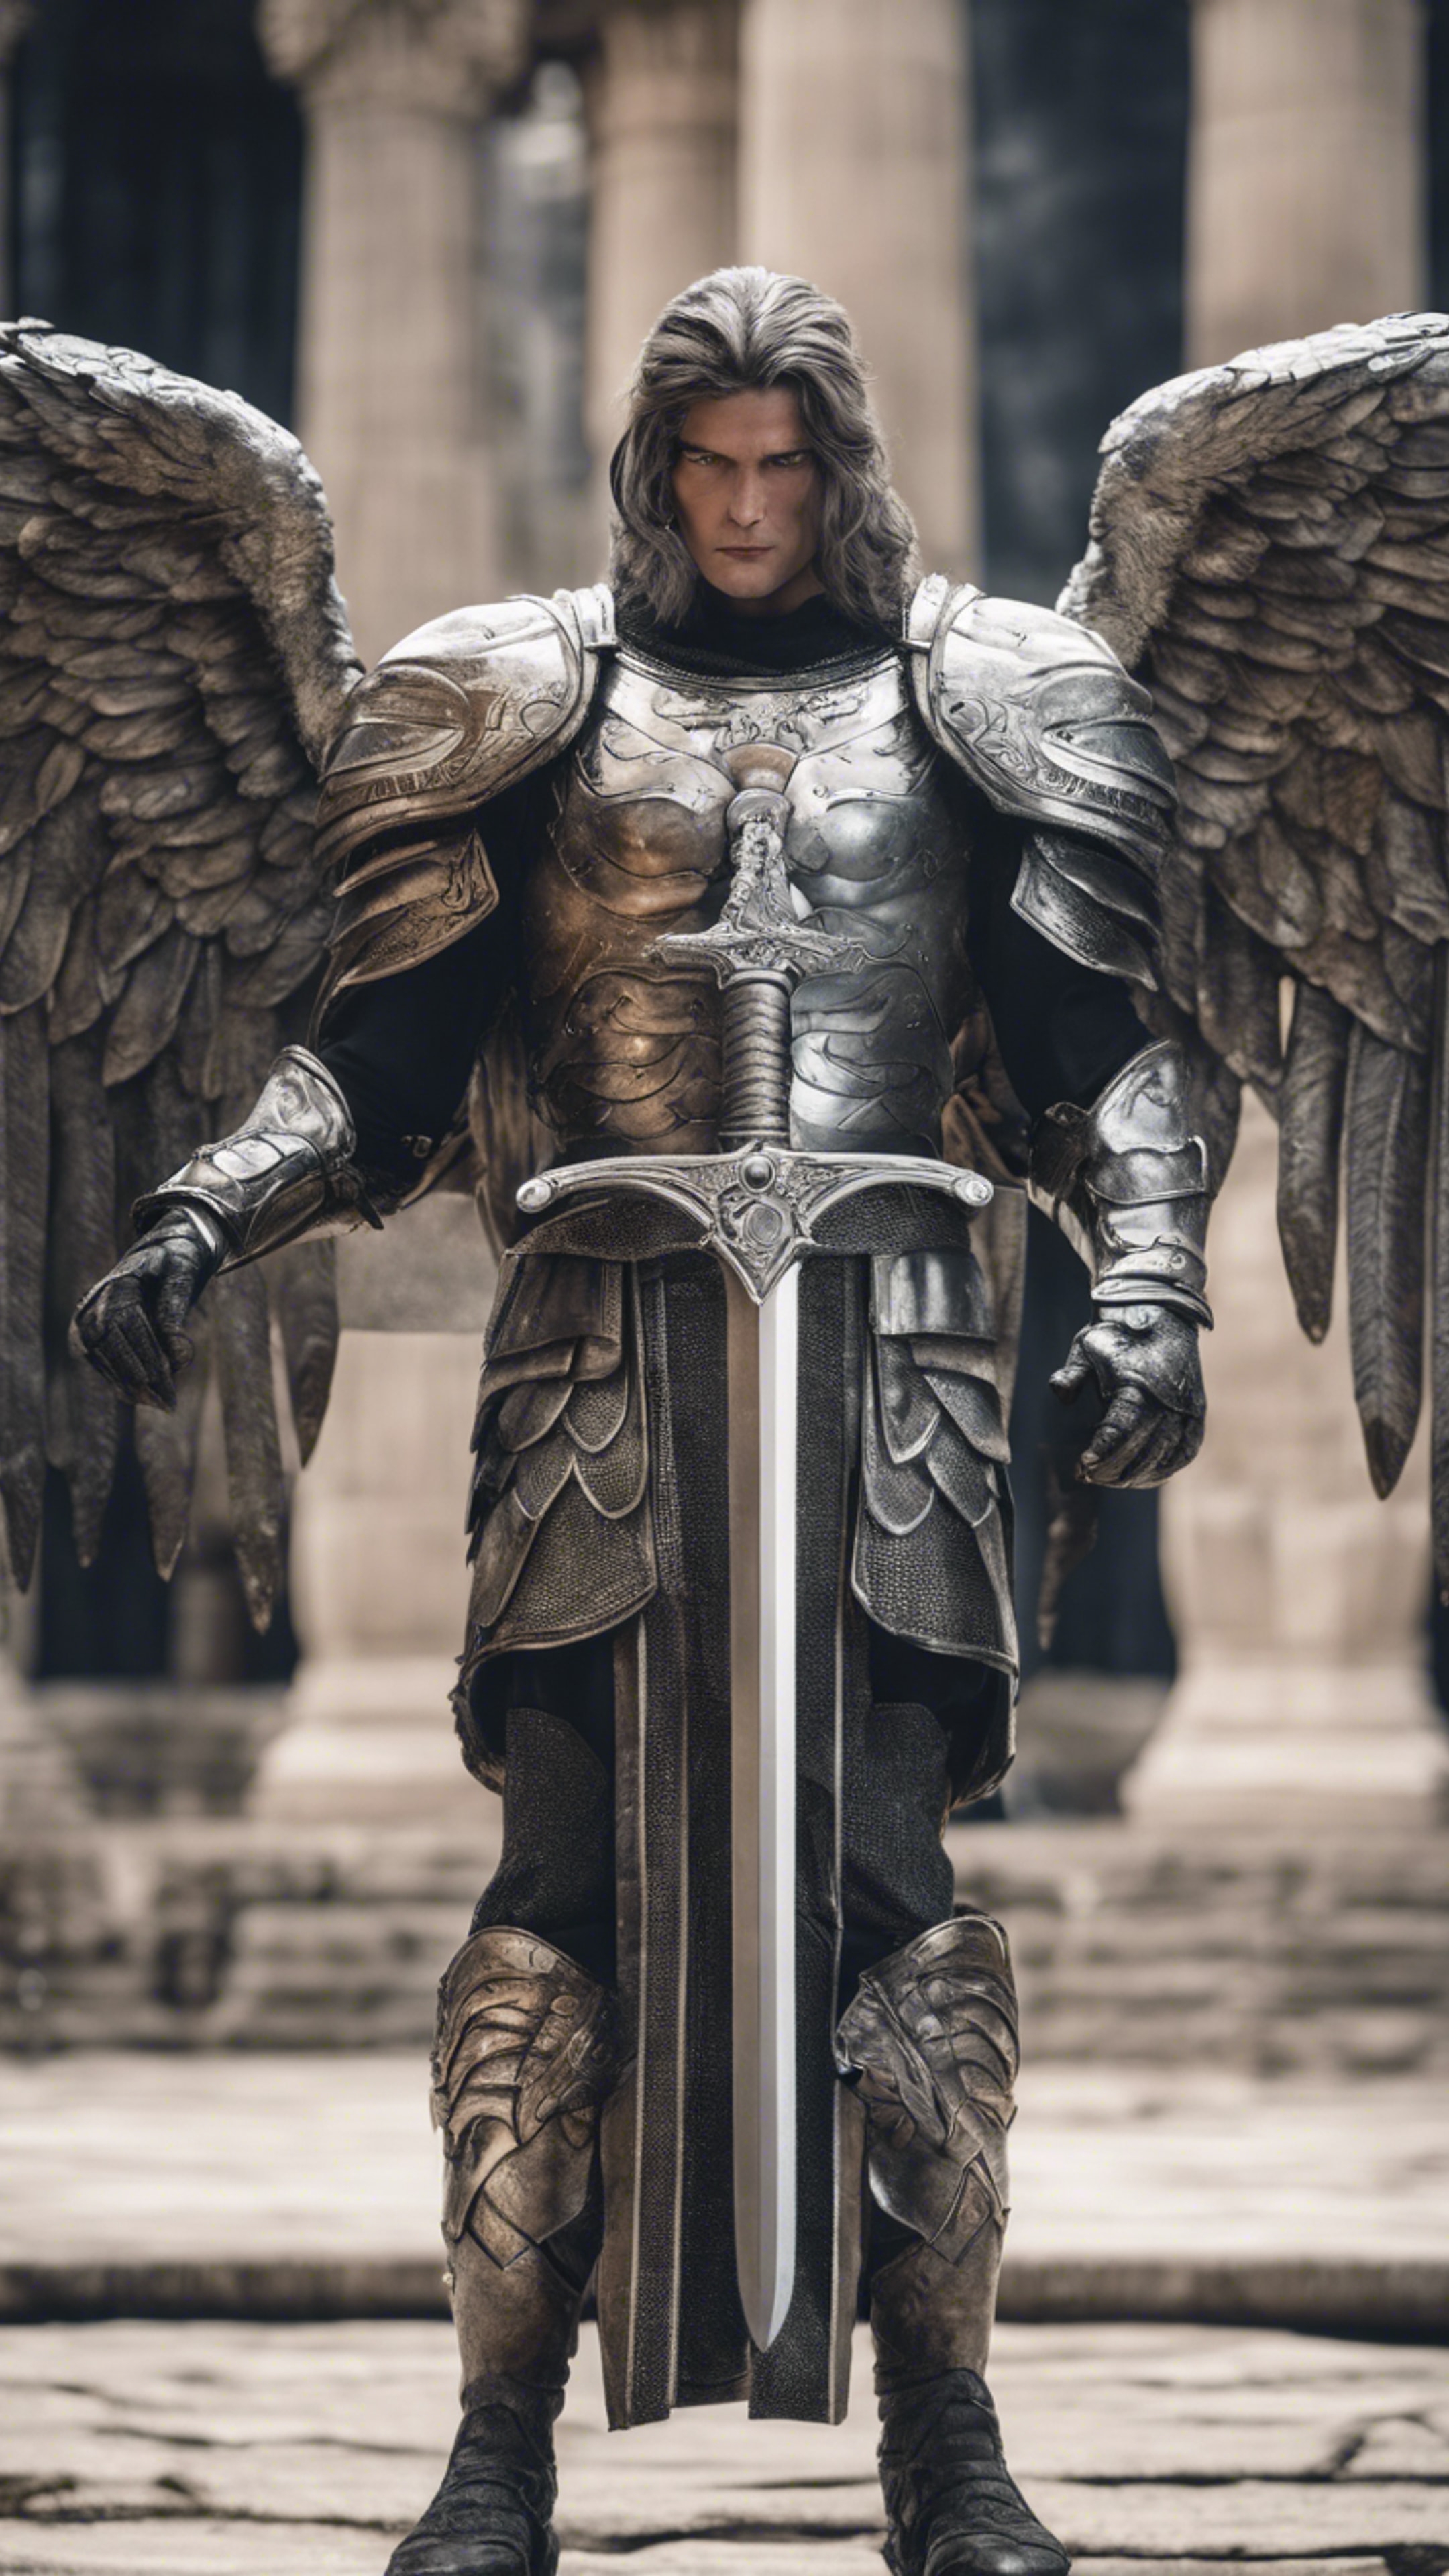 A strong archangel with a great silver sword in battle stance. טפט[1419cc1cb5fd40c69a58]